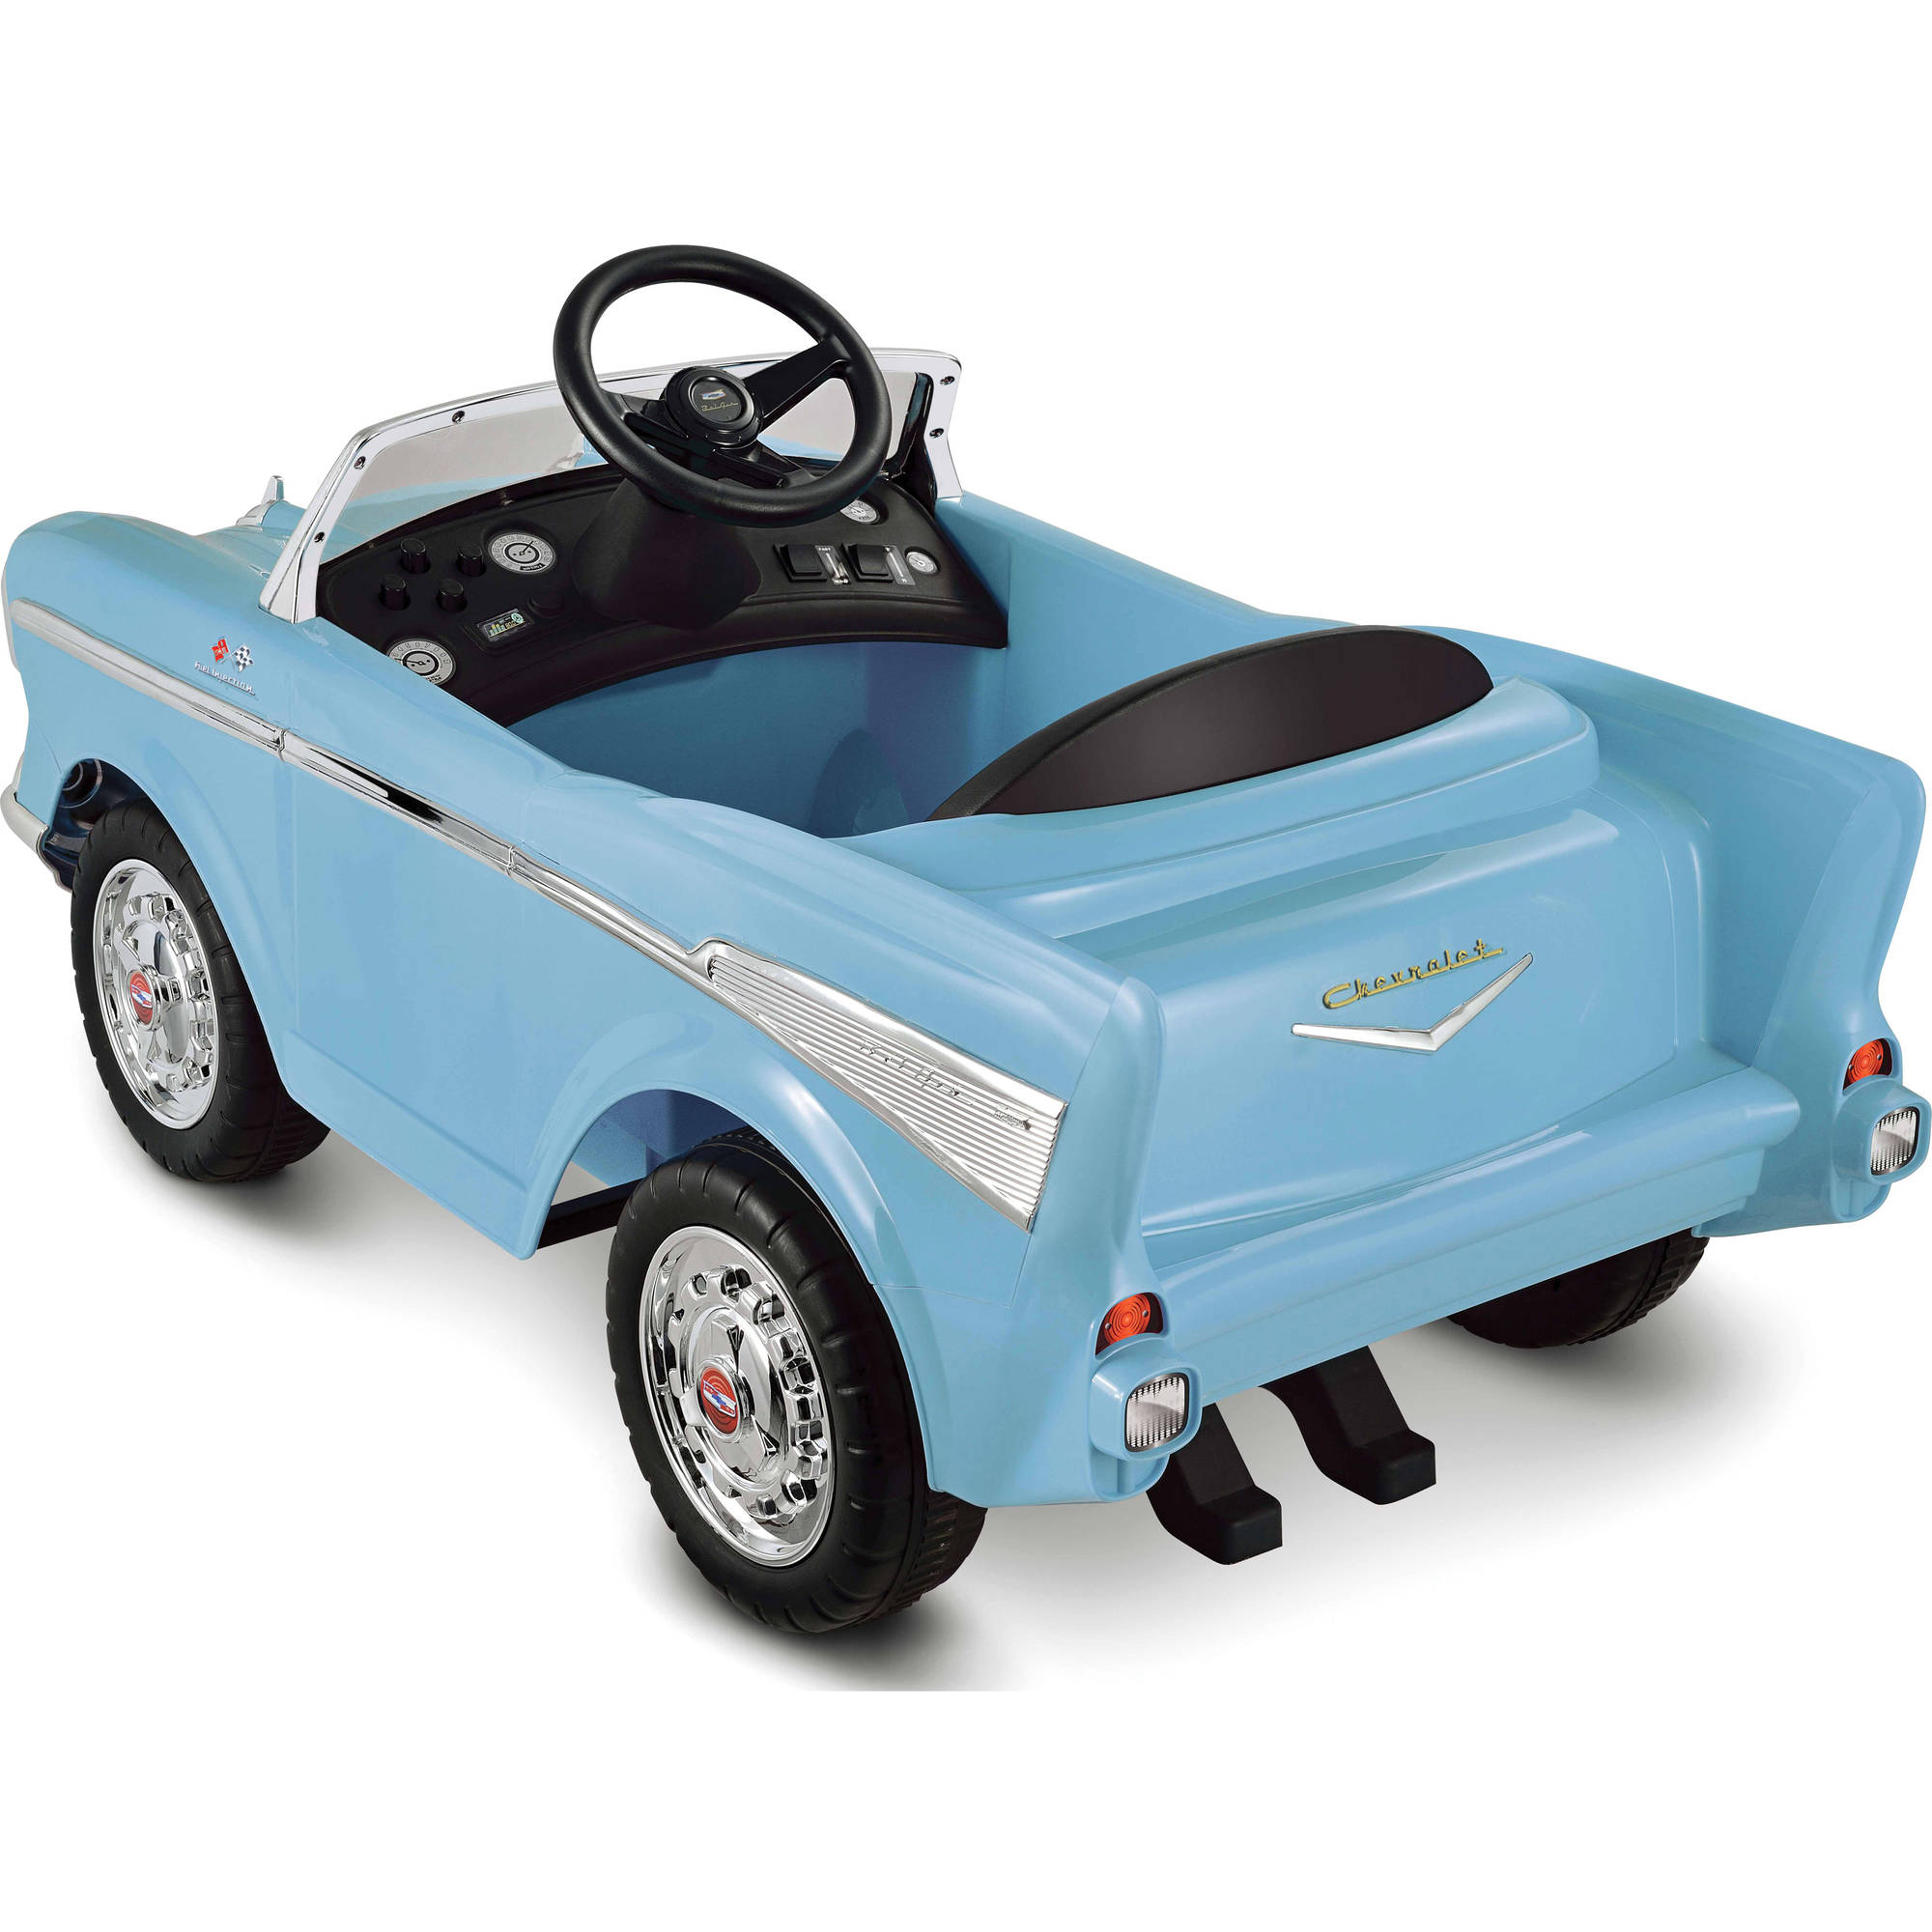 Kid Motorz 12V Chevy Bel Air Battery-Powered Ride-on in Light Blue - image 2 of 6